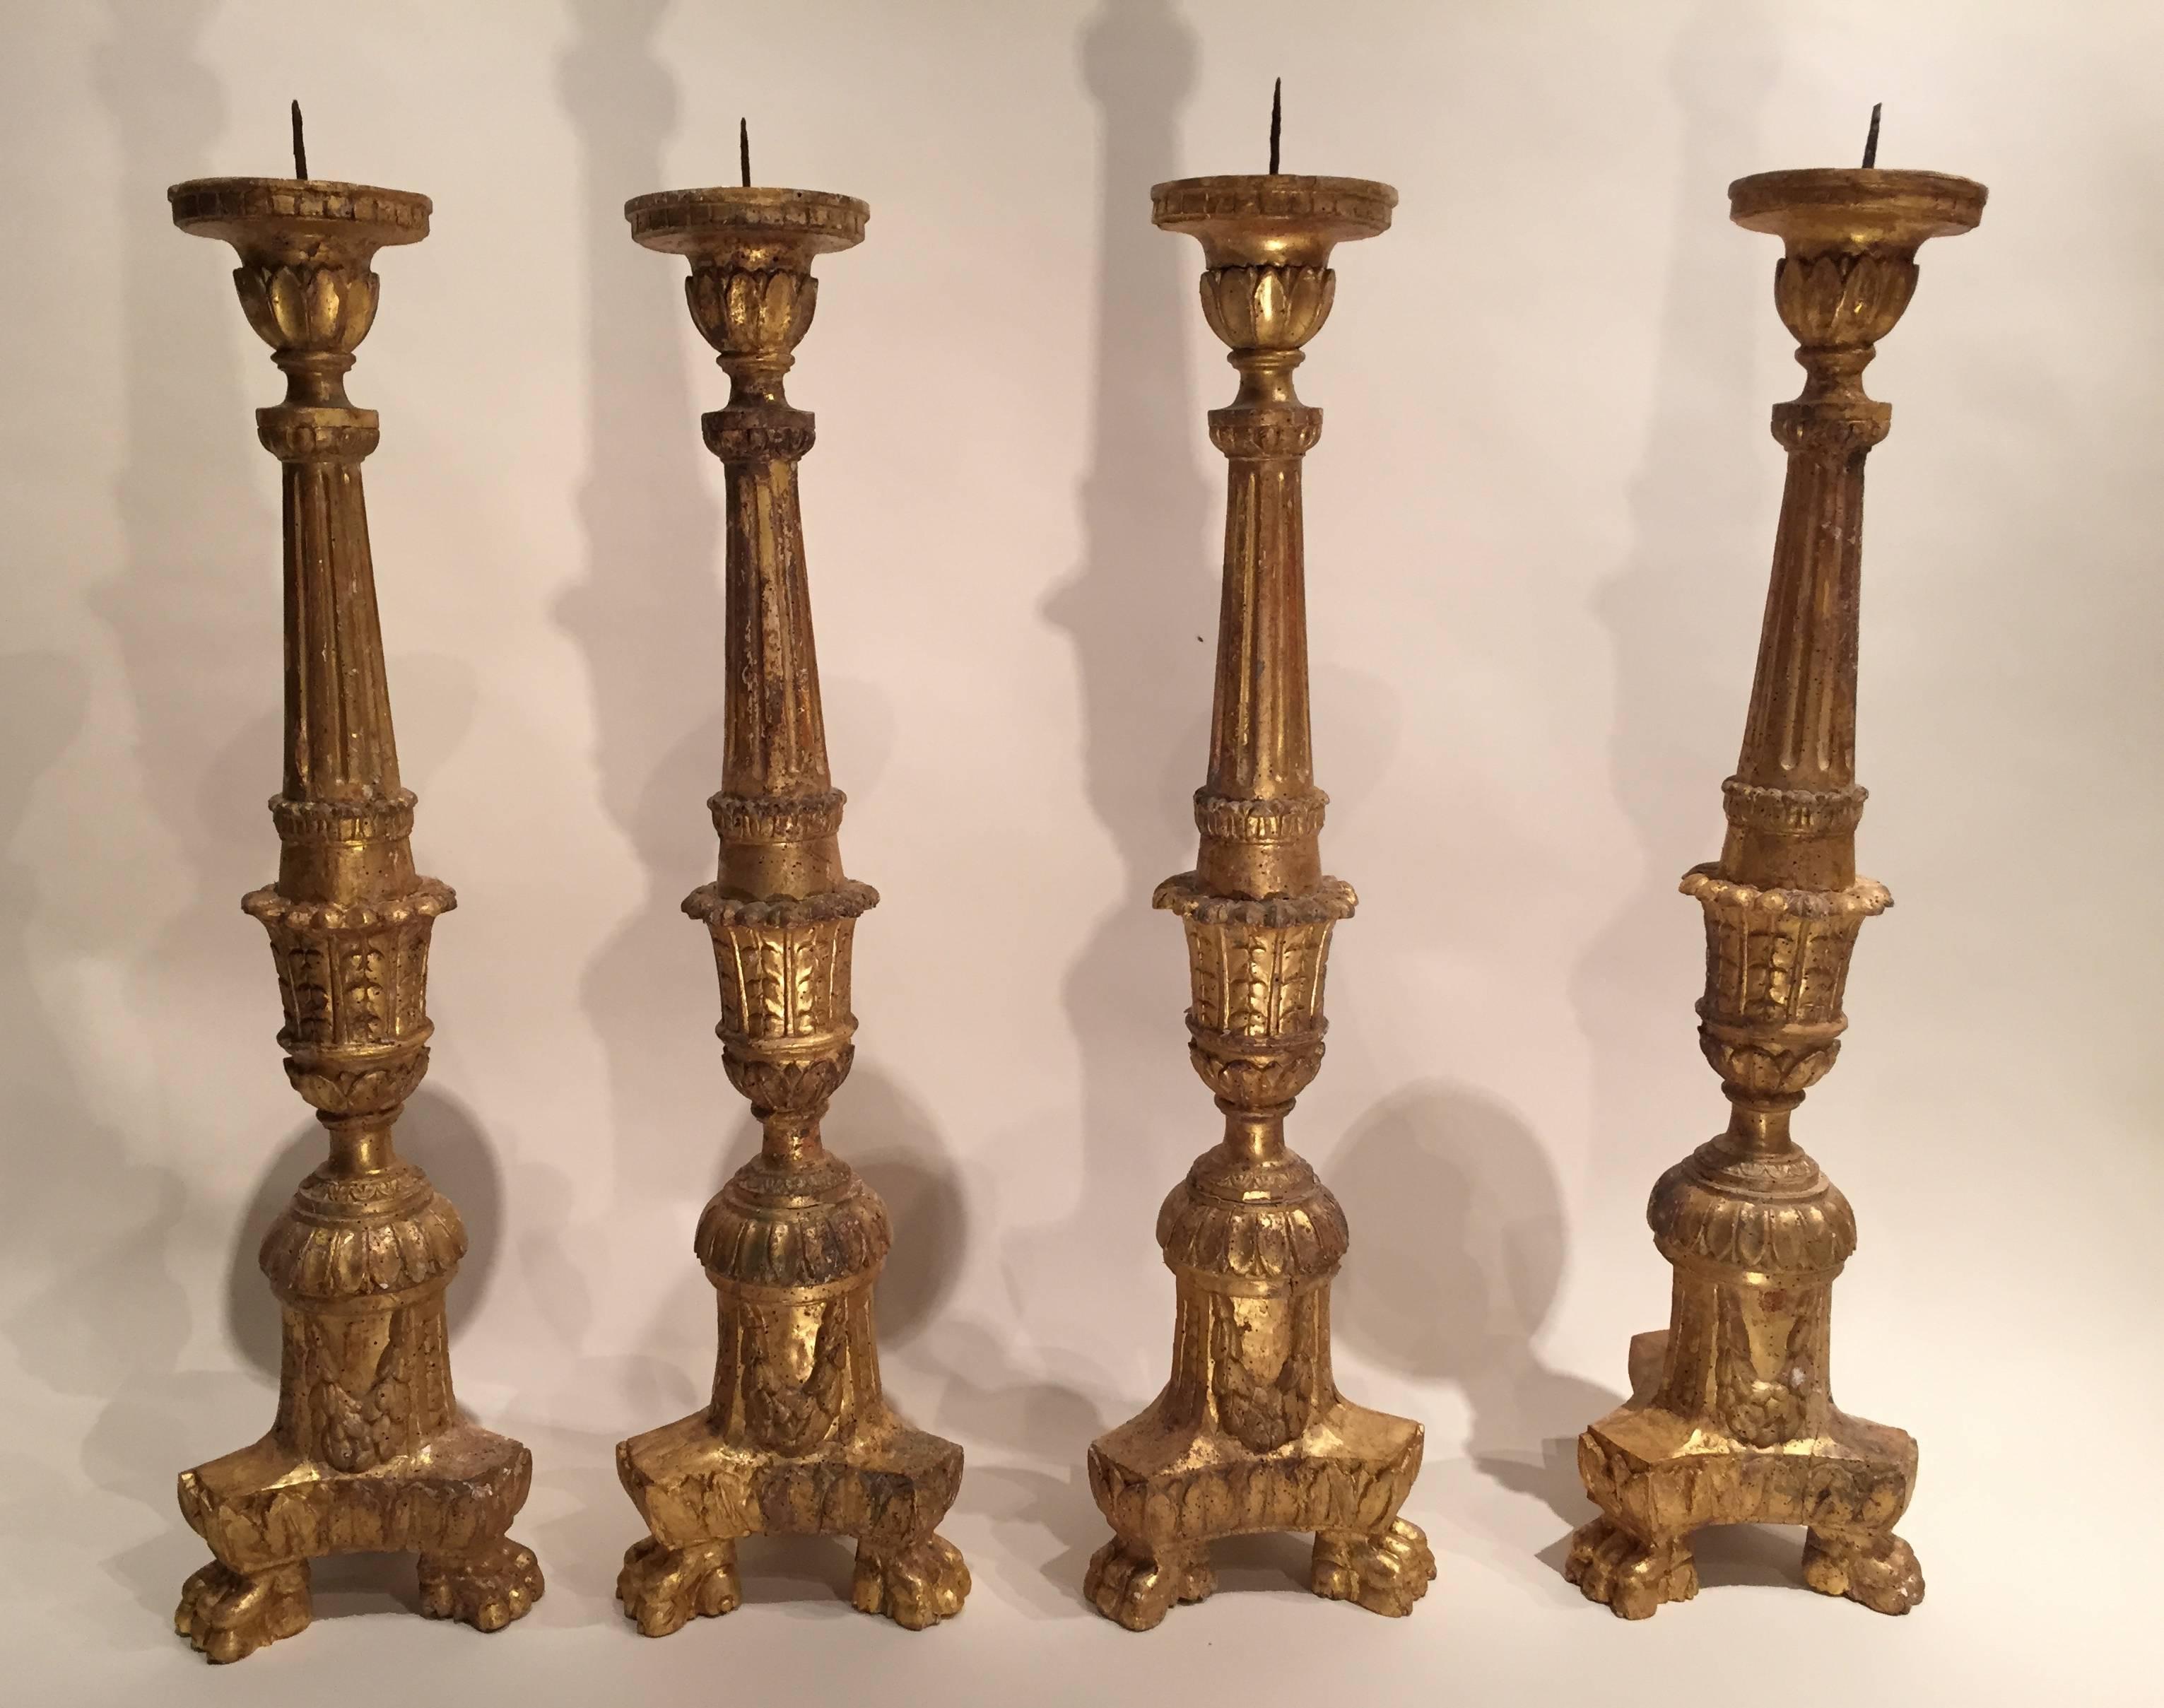 Set of Four Italian Candles, Tuscany 18th century
Set of four wooden skewers , candles golden linden leaf.
Model tripod legs , the barrels balusters exquisitely carved with garlands and palm leaves .

Excellent state of preservation , original